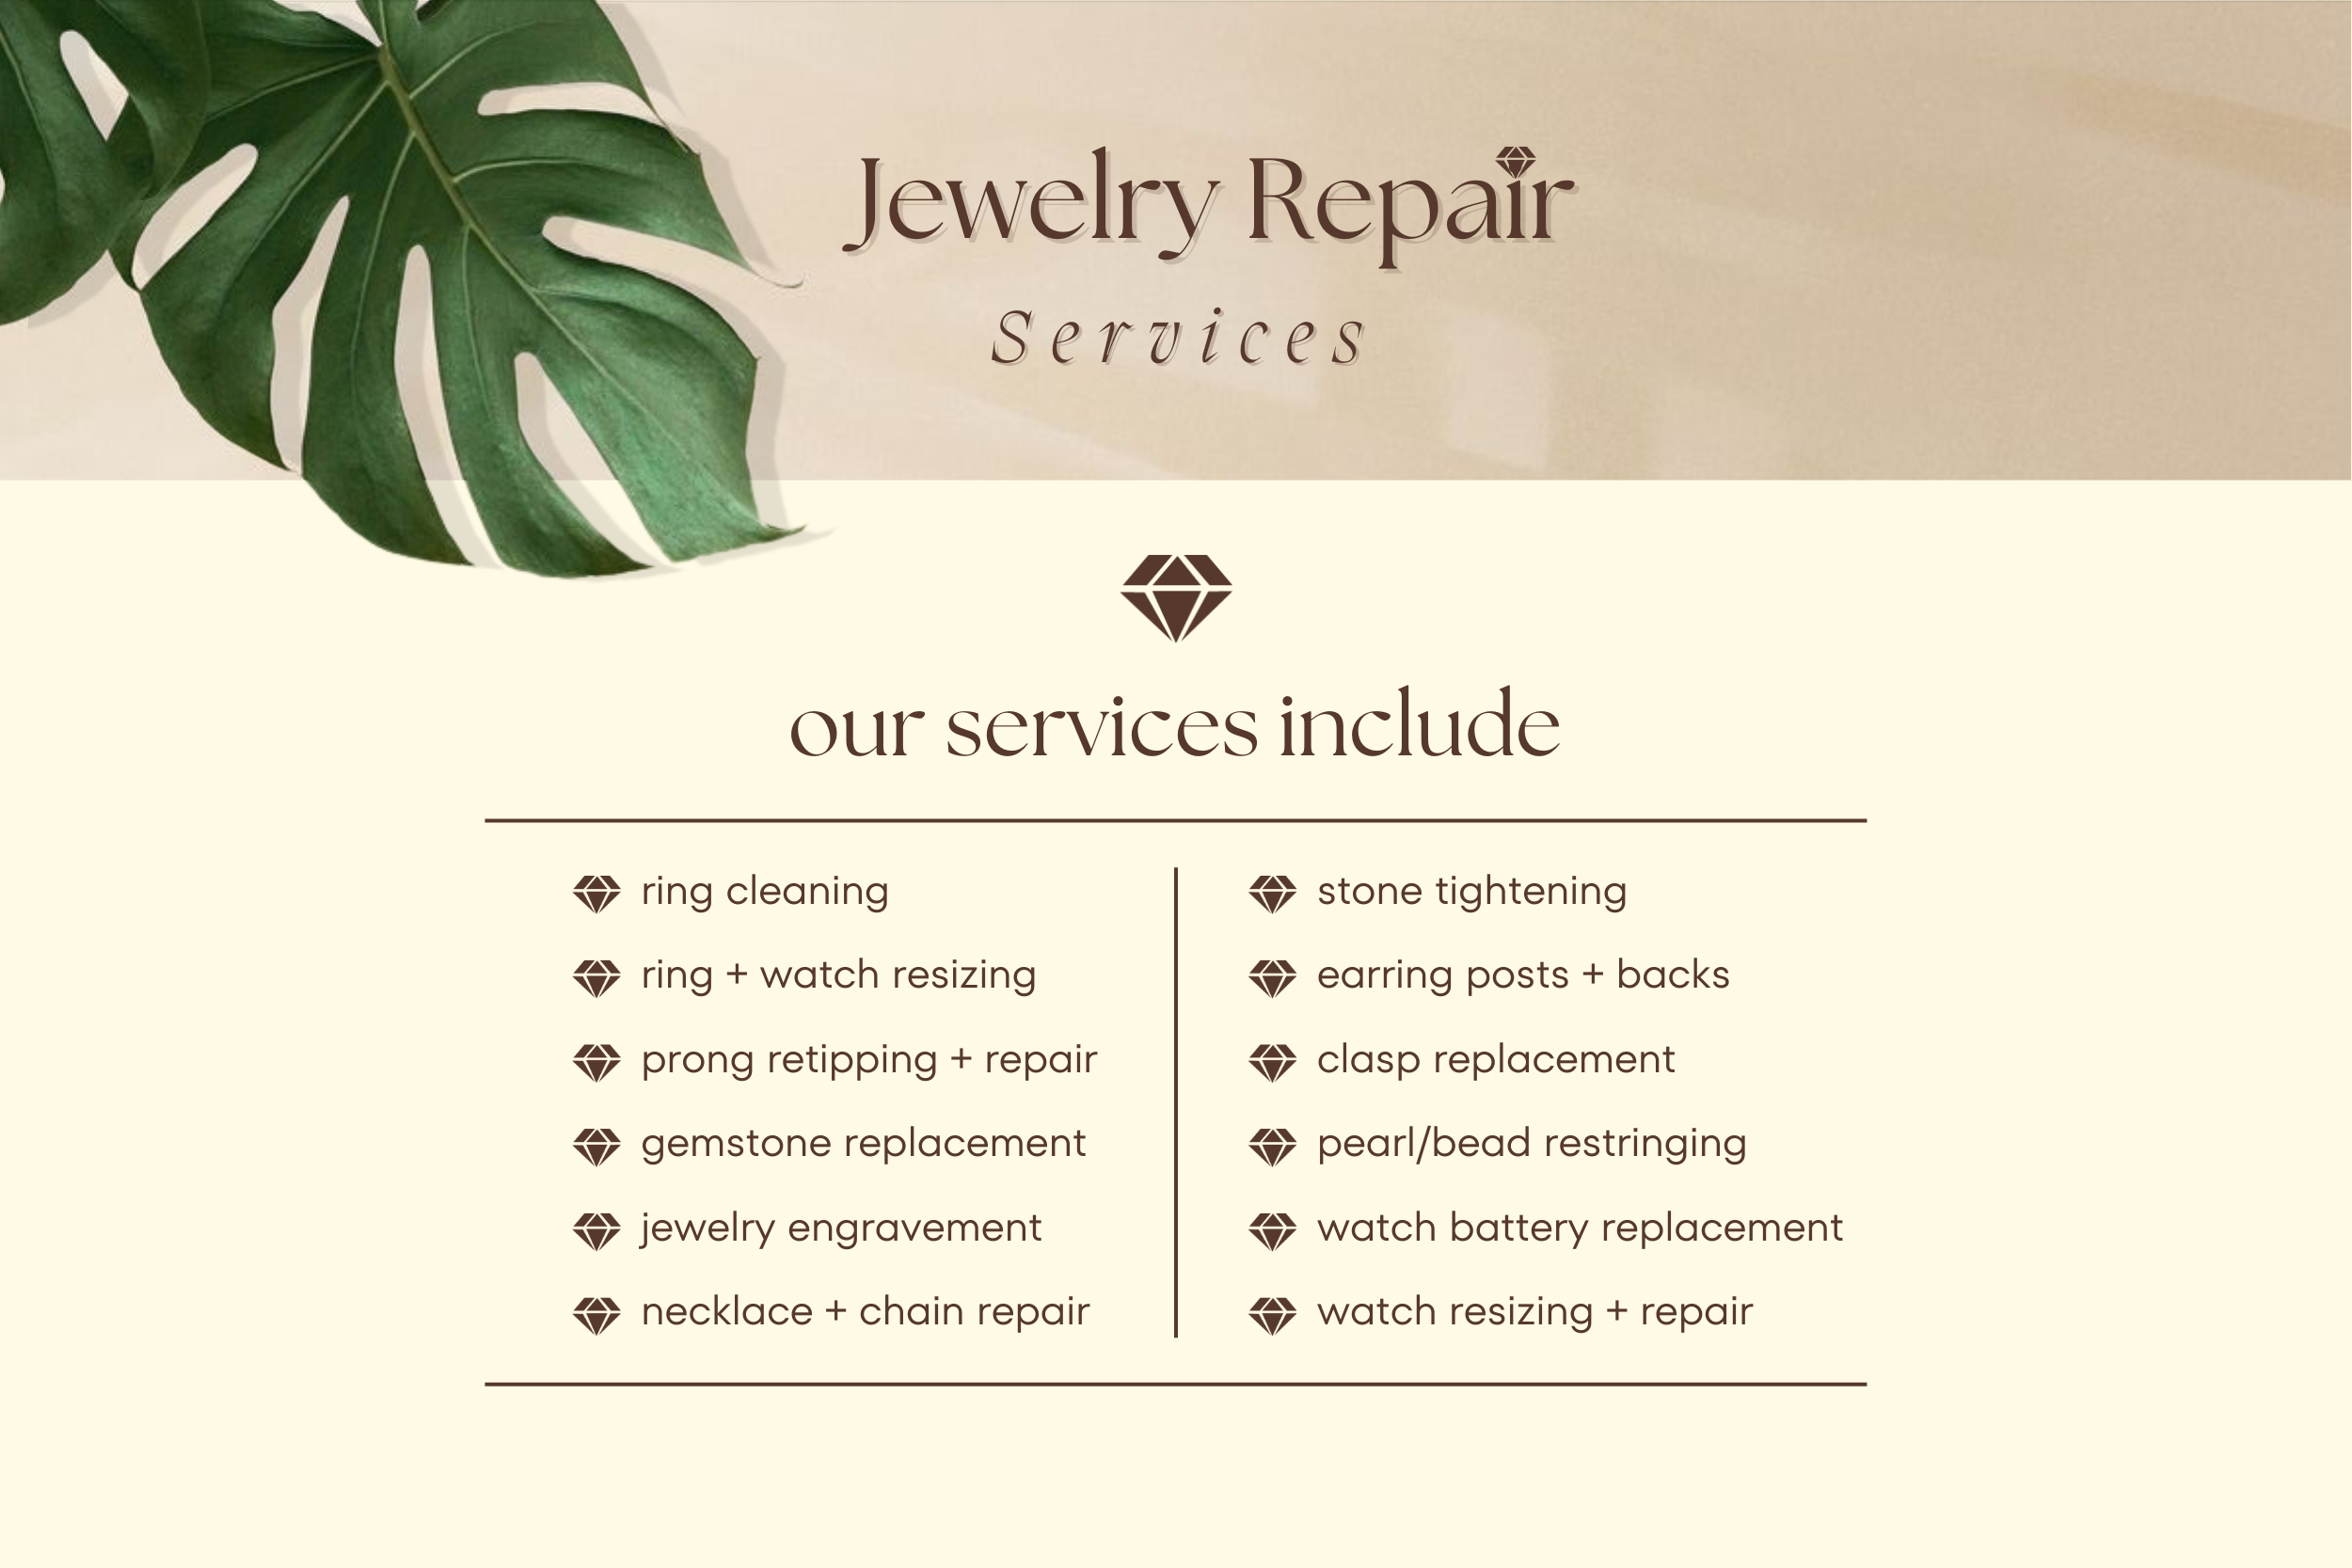 All of our jewelry  repair services: We offer ring cleaning, ring sizing, gemstone replacement, prong retipping, stone tightening, engraving rings and necklaces, repairing broken clasps and chains, new earring backing, restringing pearls, watch sizing, watch batteries, and watch repair.